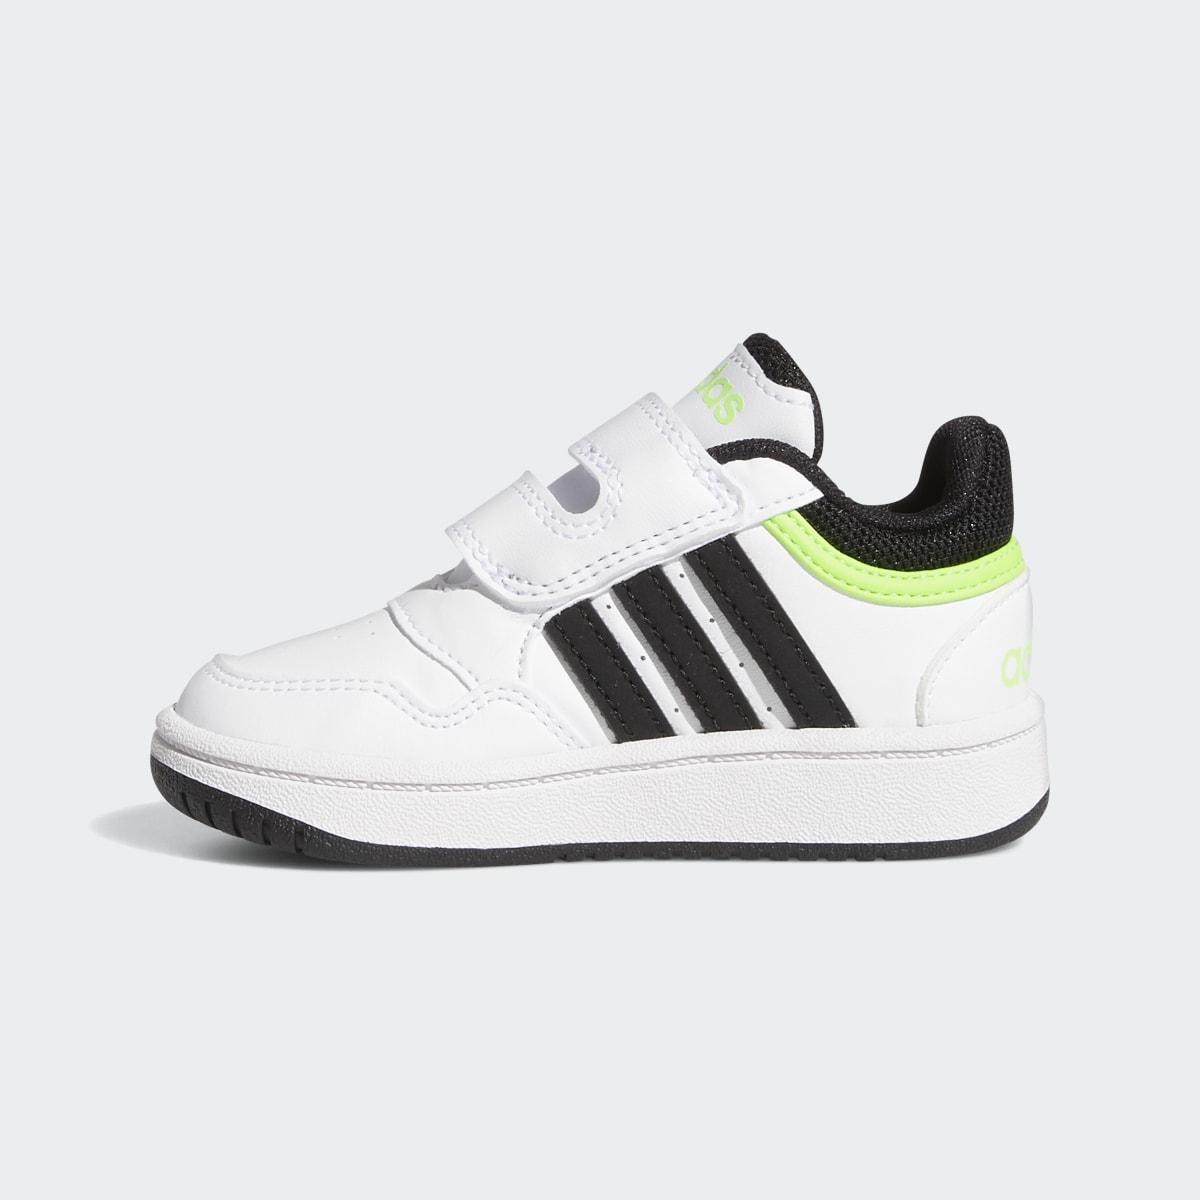 Adidas Hoops Shoes. 7